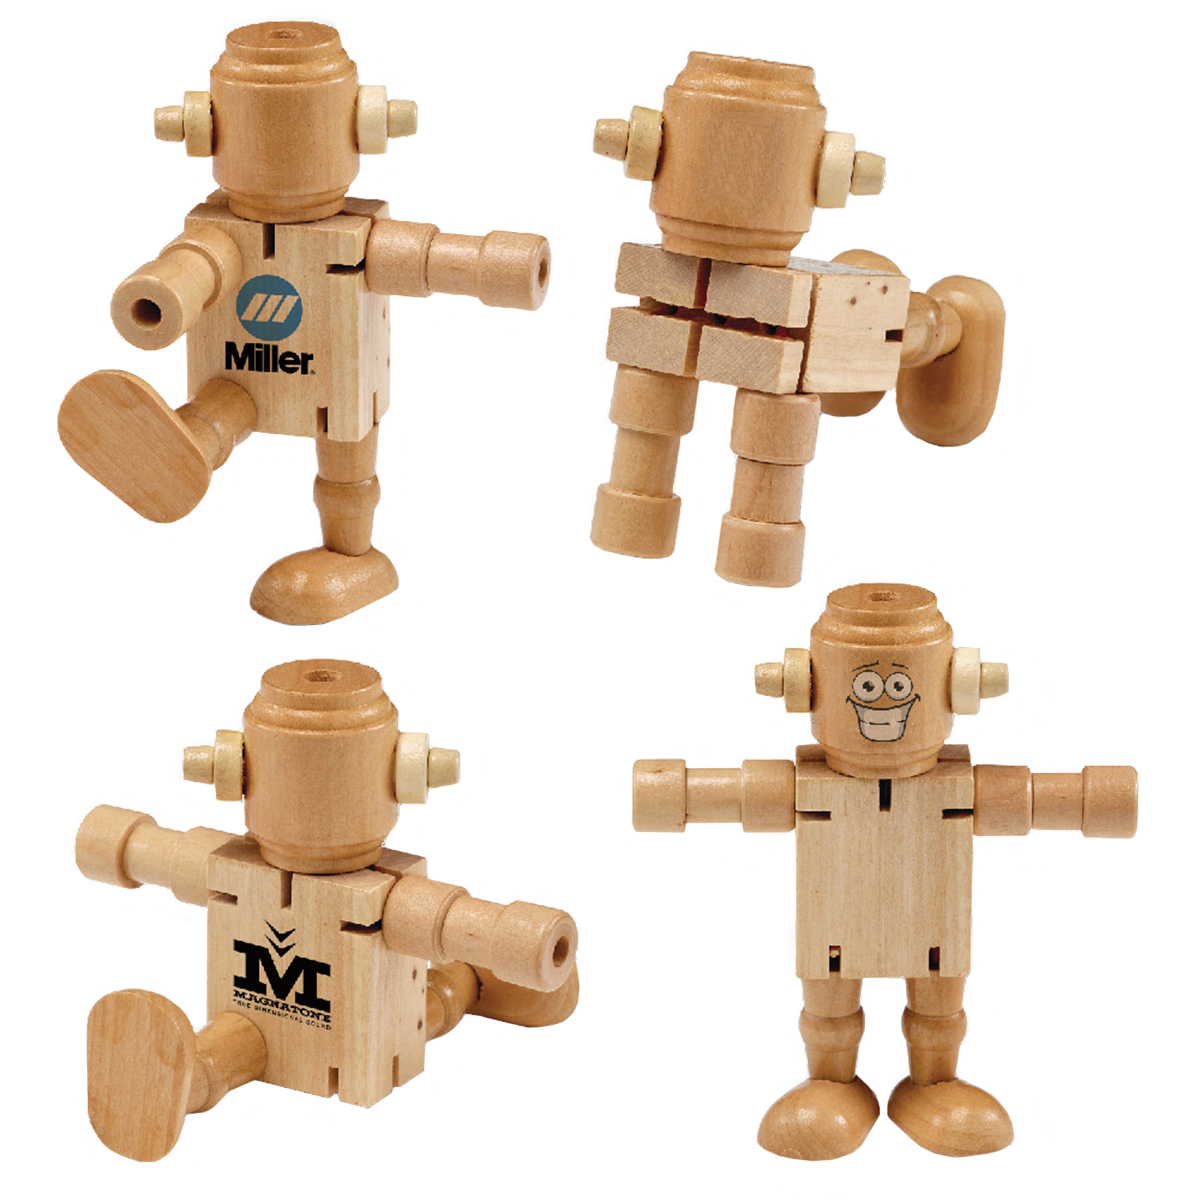 RoboDroidBot Wooden Poseable Robot